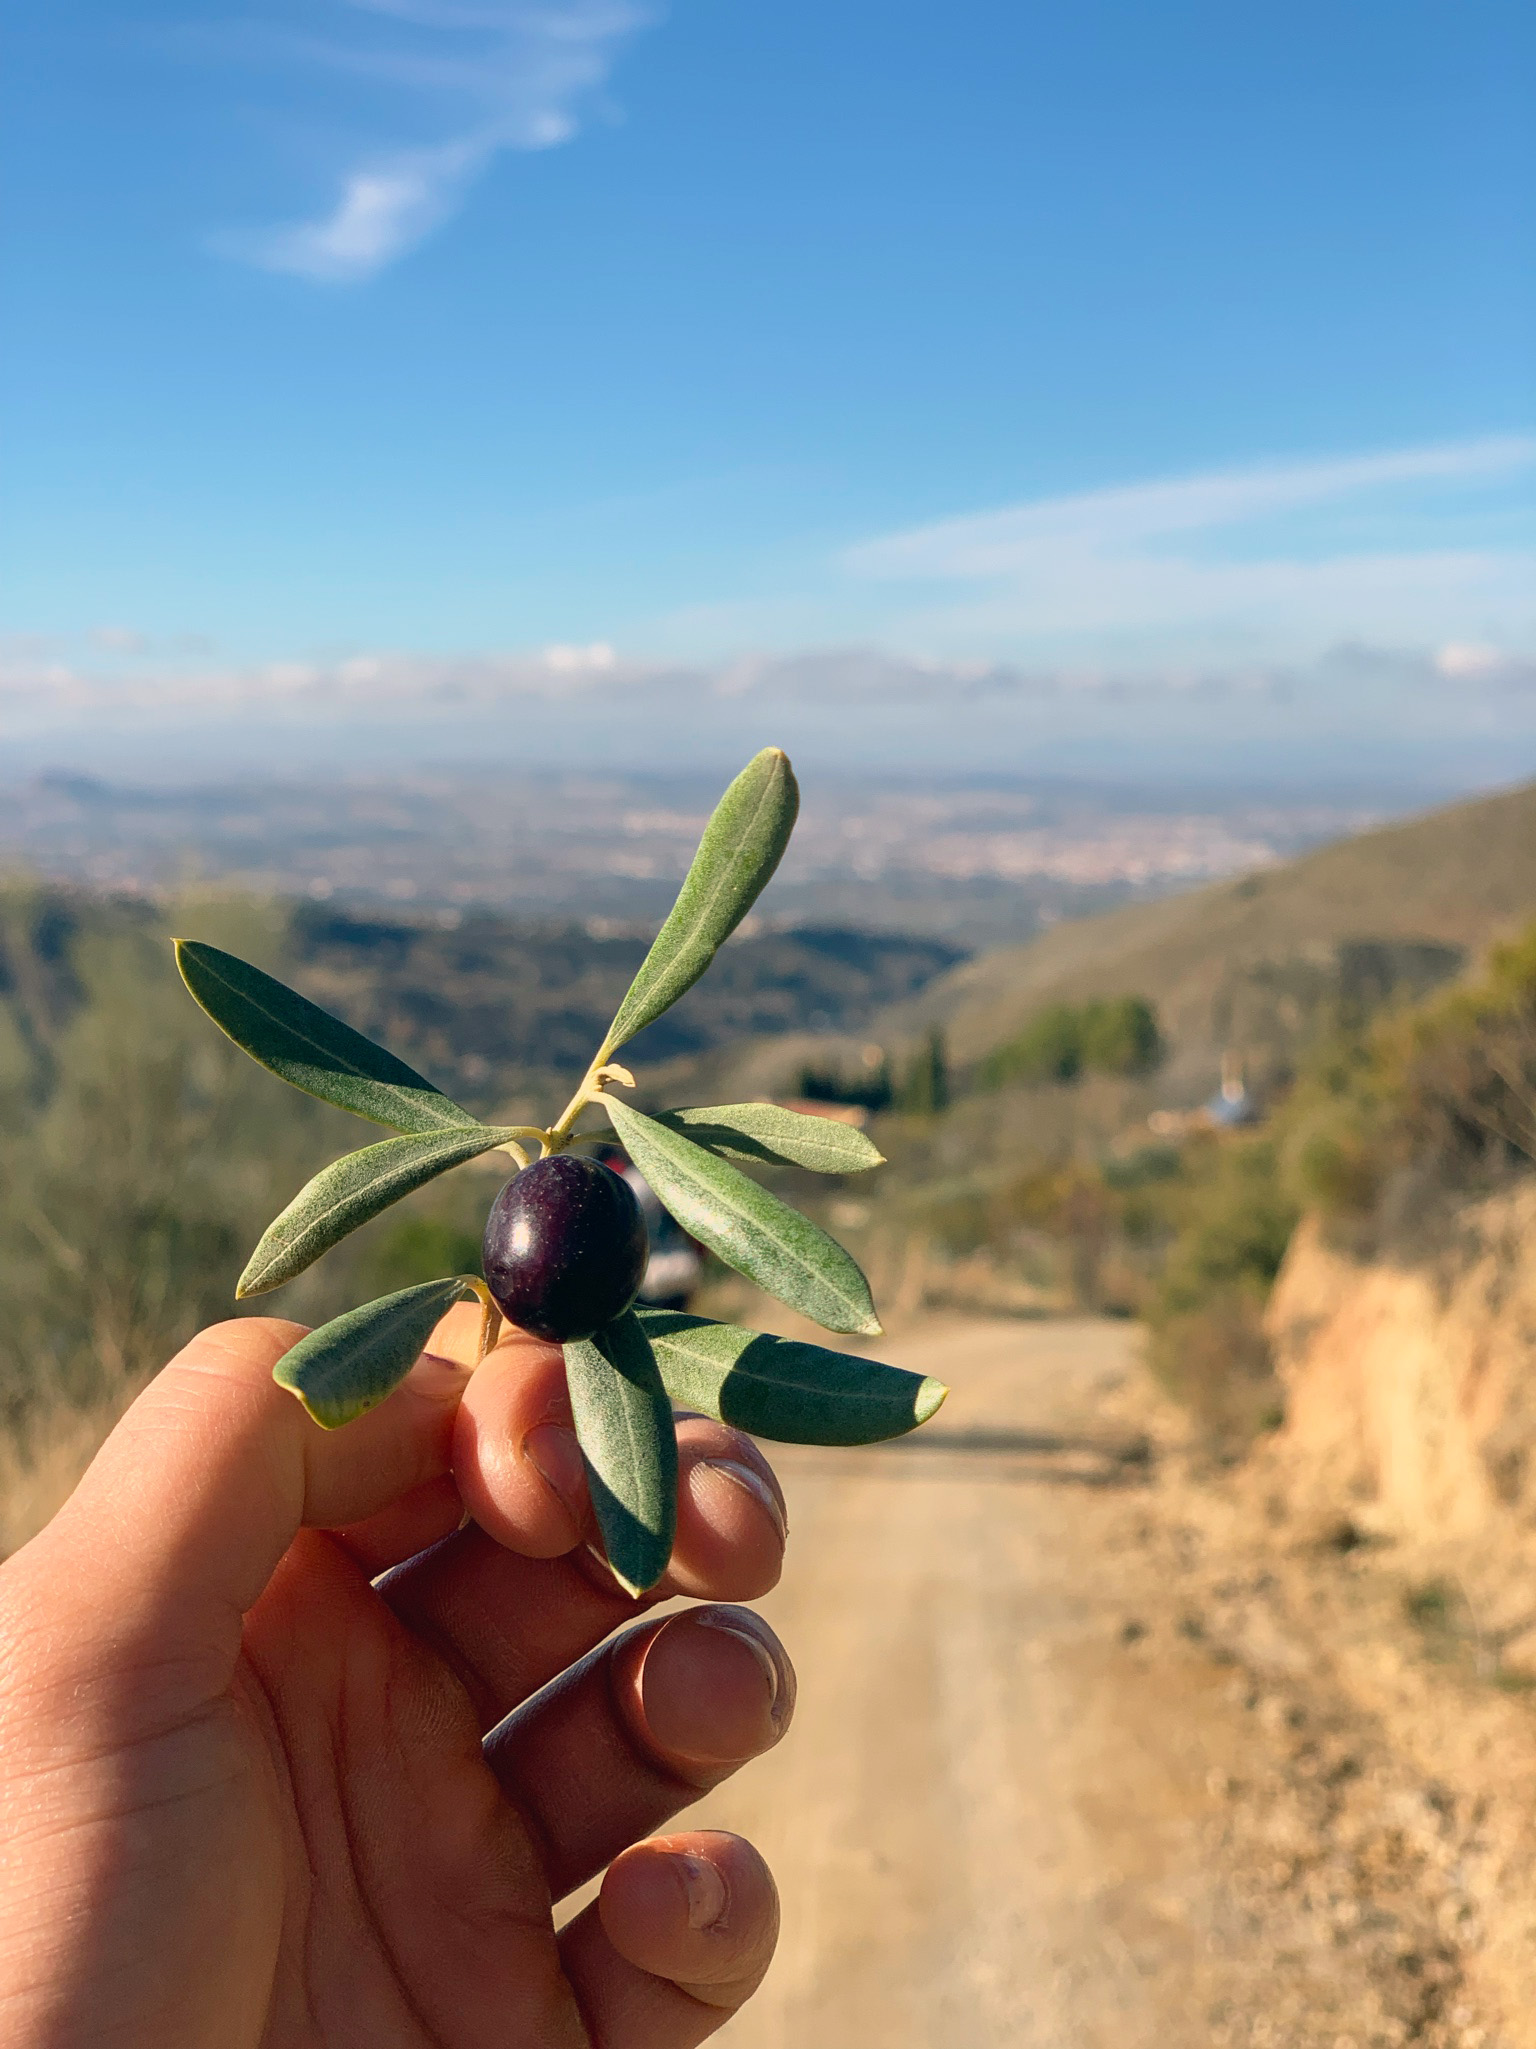 Gina takes a photo of her hand which is holding a fresh olive on a trig with leaves. The Spanish countryside is in the background.